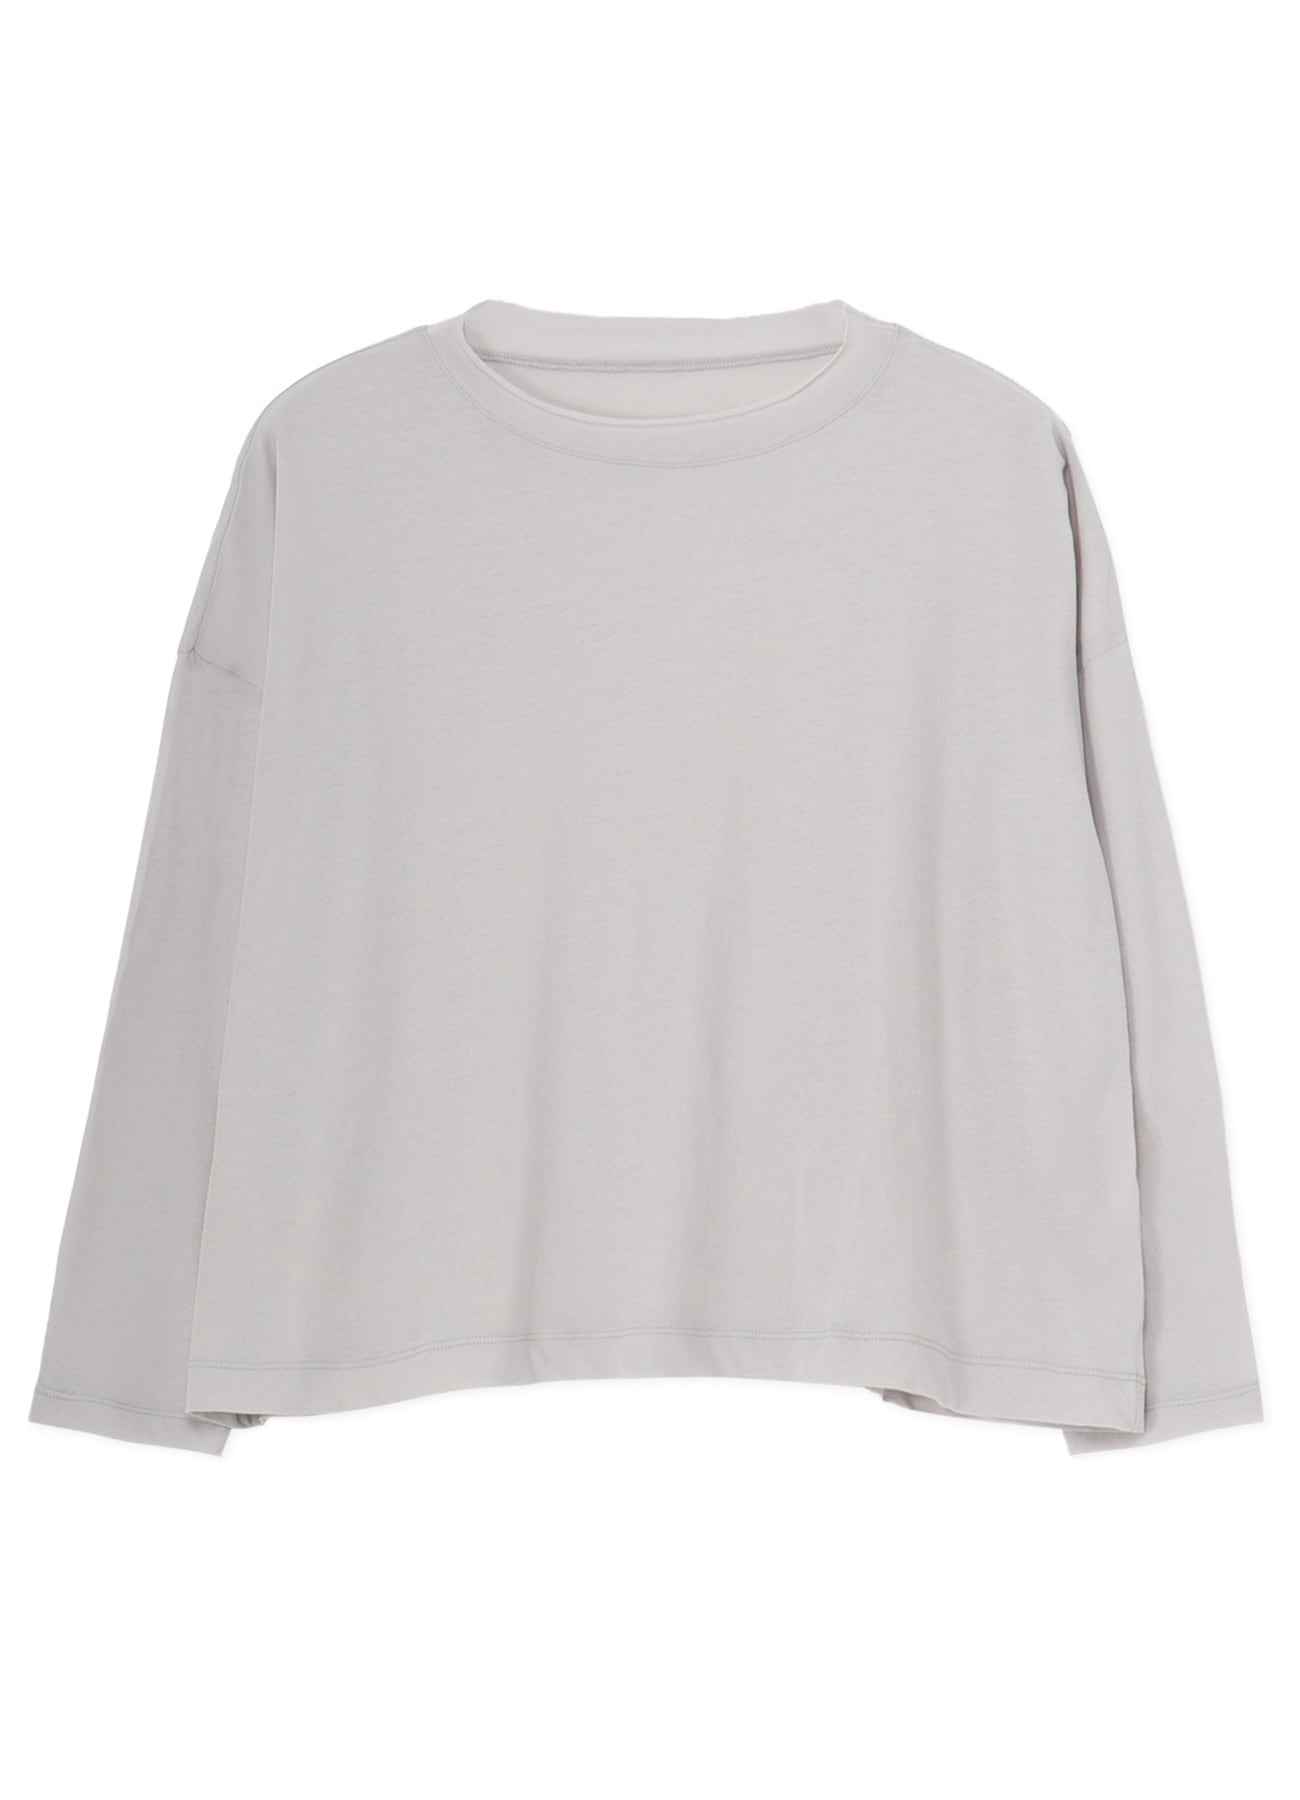 HARD TWISTED JERSEY CURLED COLLAR LONG SLEEVE T(S Light Grey): Y's 